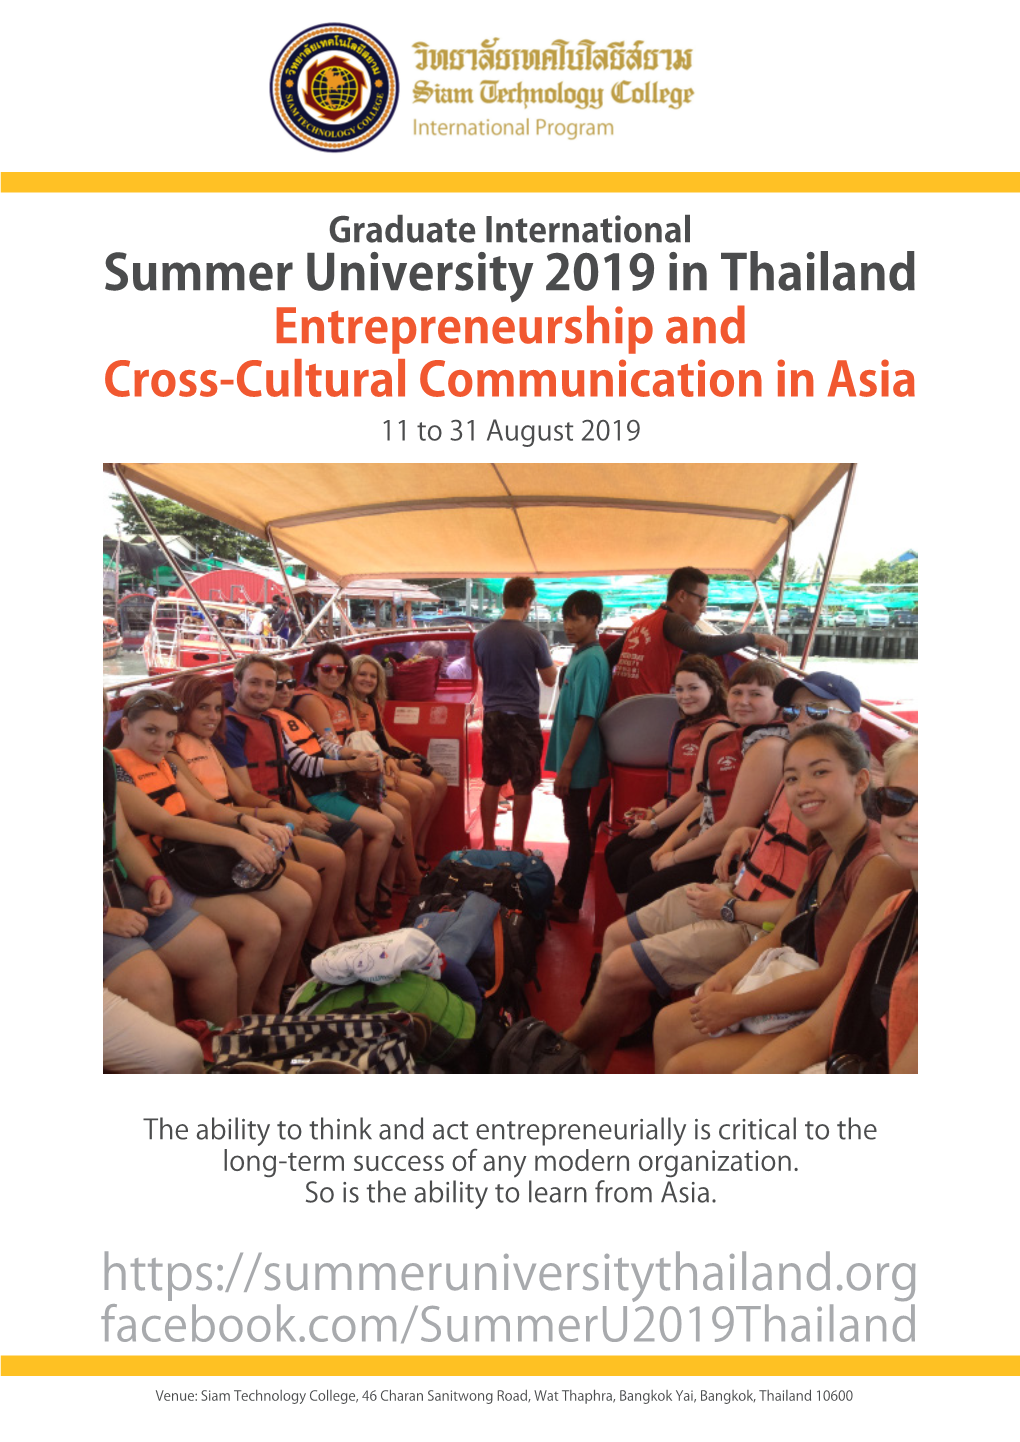 Graduate International Summer University 2019 in Thailand Entrepreneurship and Cross-Cultural Communication in Asia 11 to 31 August 2019